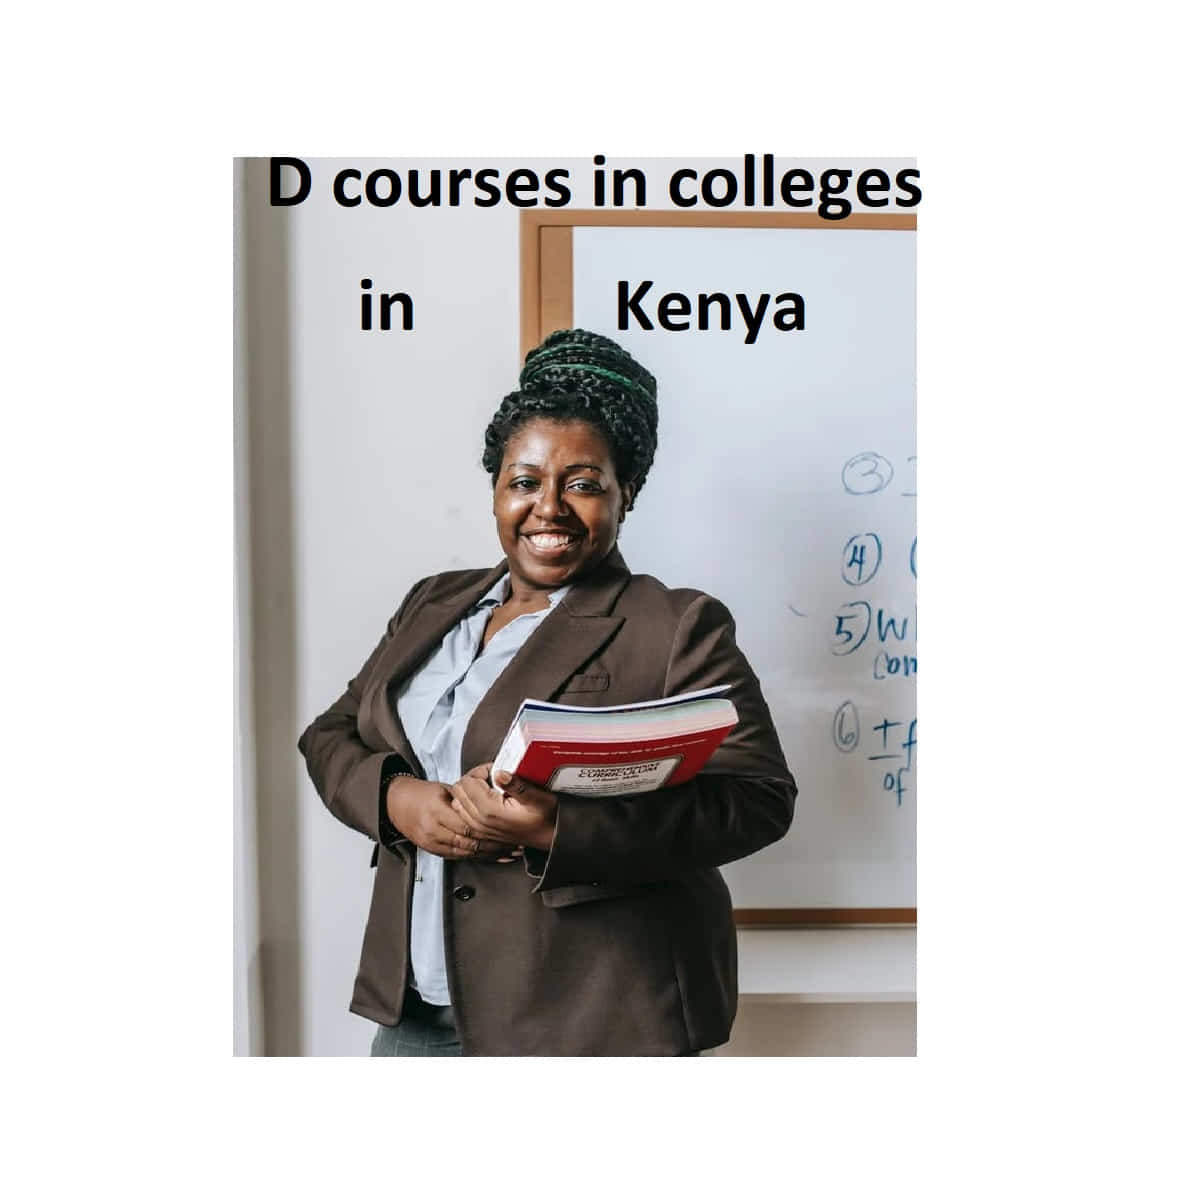 D plain courses in colleges in Kenya